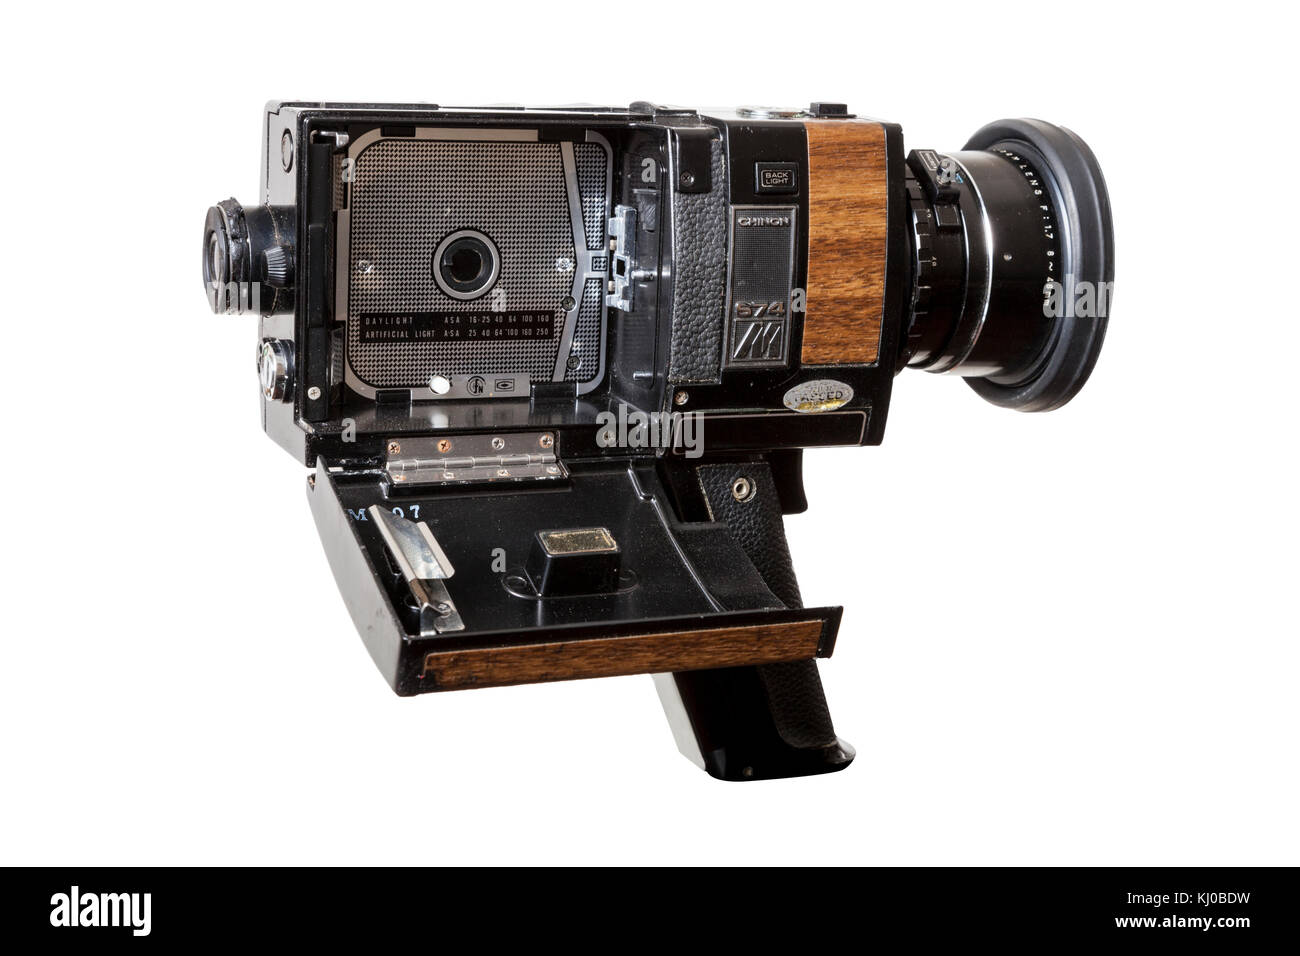 Chinon 674 macro power zoom synchro sound Super 8 movie camera with the film  cartridge compartment open. A 1970s cine camera sold by Dixons Stock Photo  - Alamy